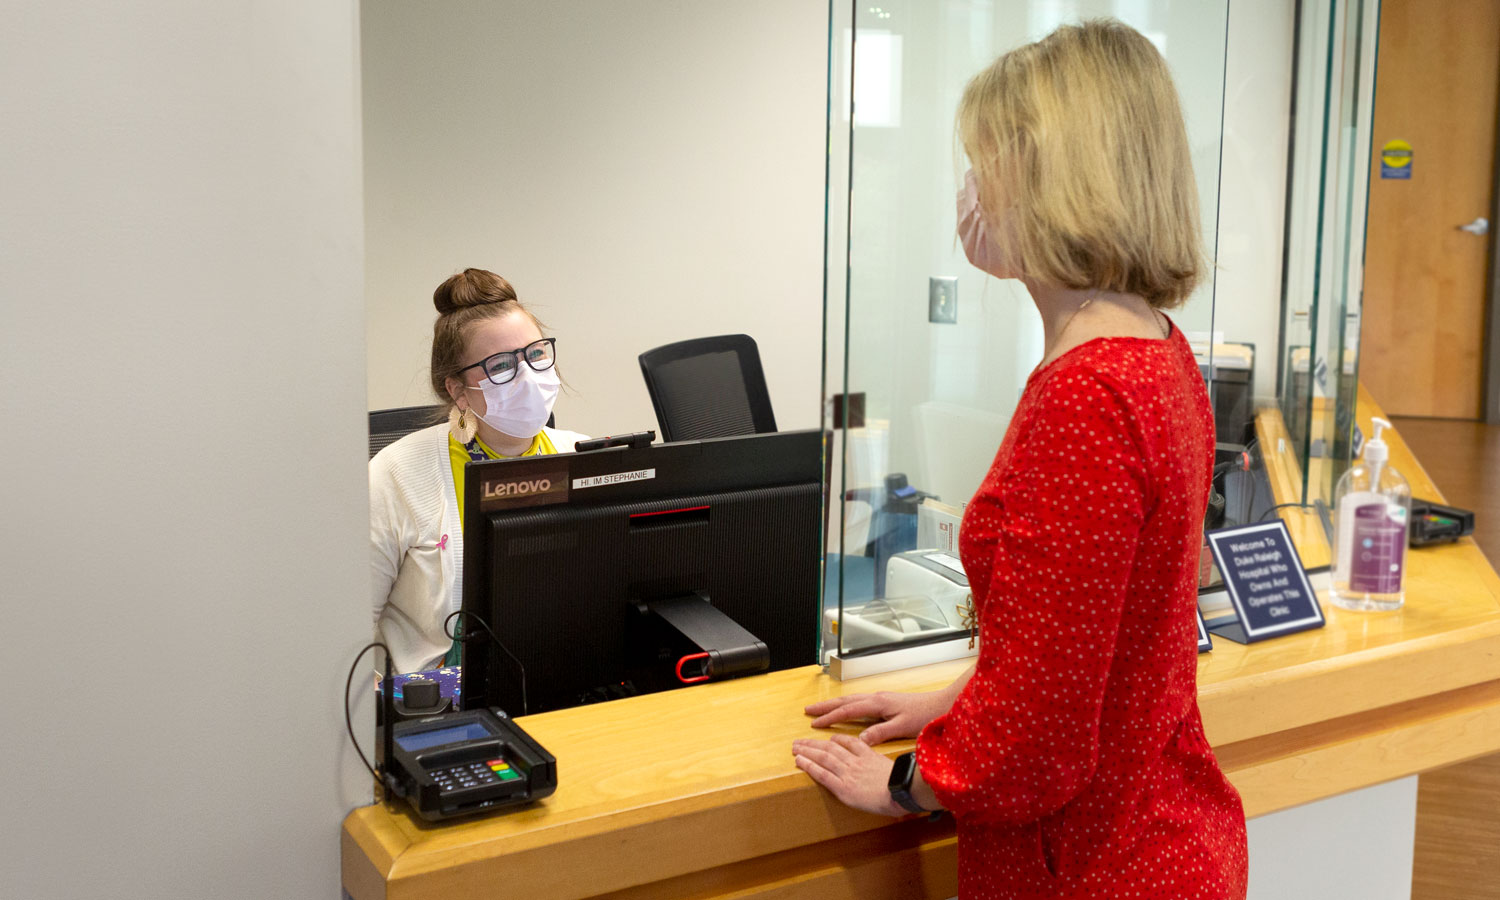 A patient checks in at the front desk